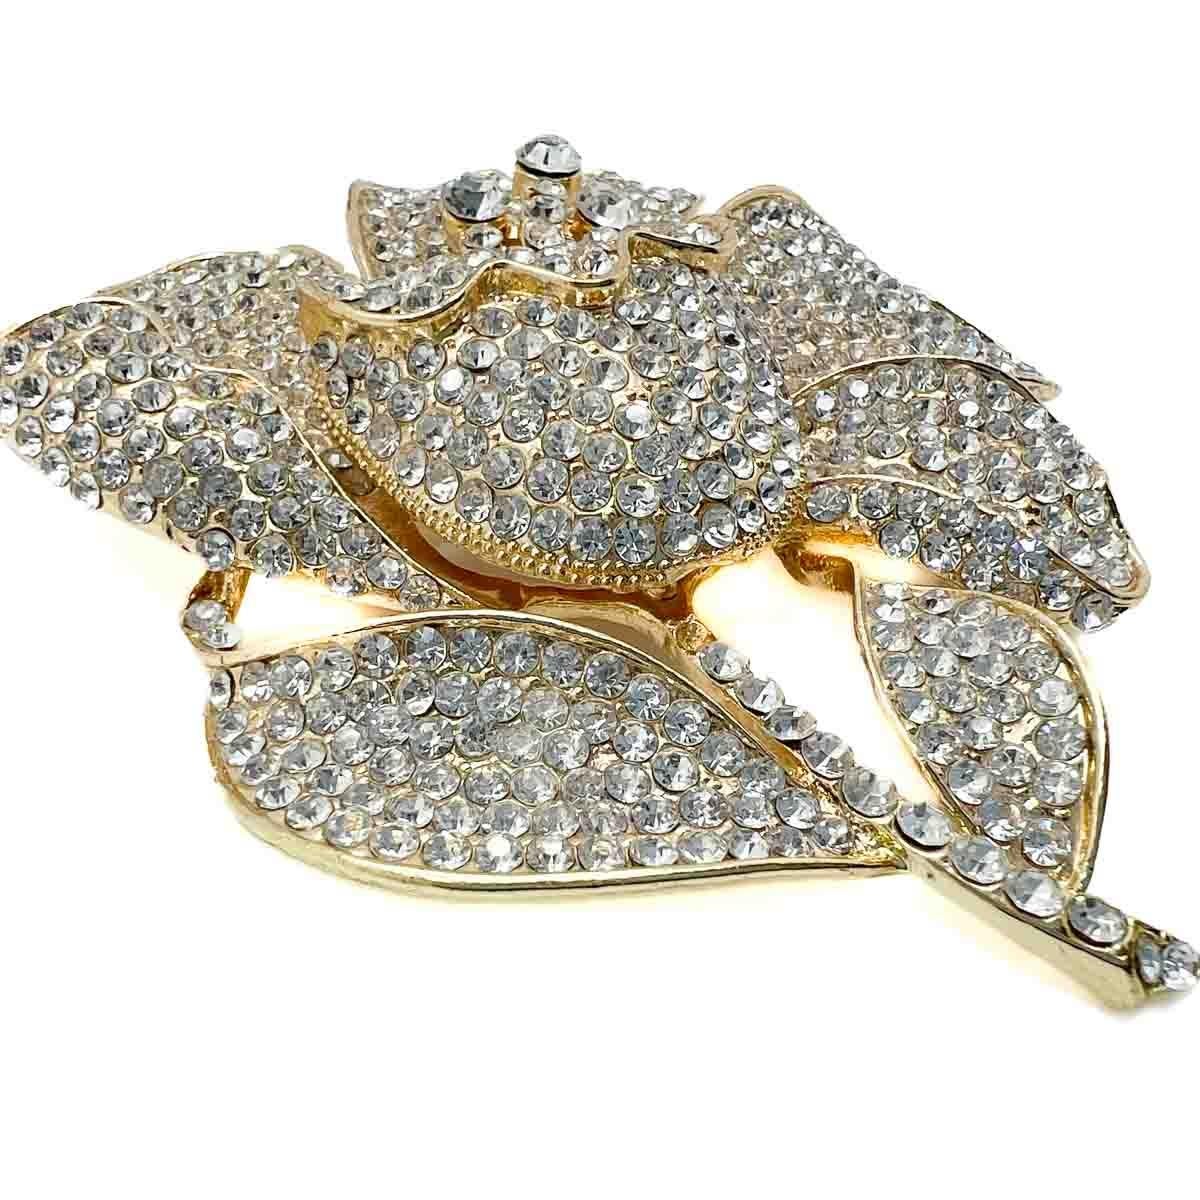 A spectacular Oversize Crystal Flower Brooch. Not for the faint hearted, this beauty will certainly wow and sparkle.
An unsigned beauty. A rare treasure. Just because a jewel doesn’t carry a designer name, doesn’t mean it isn't coveted. The unsigned